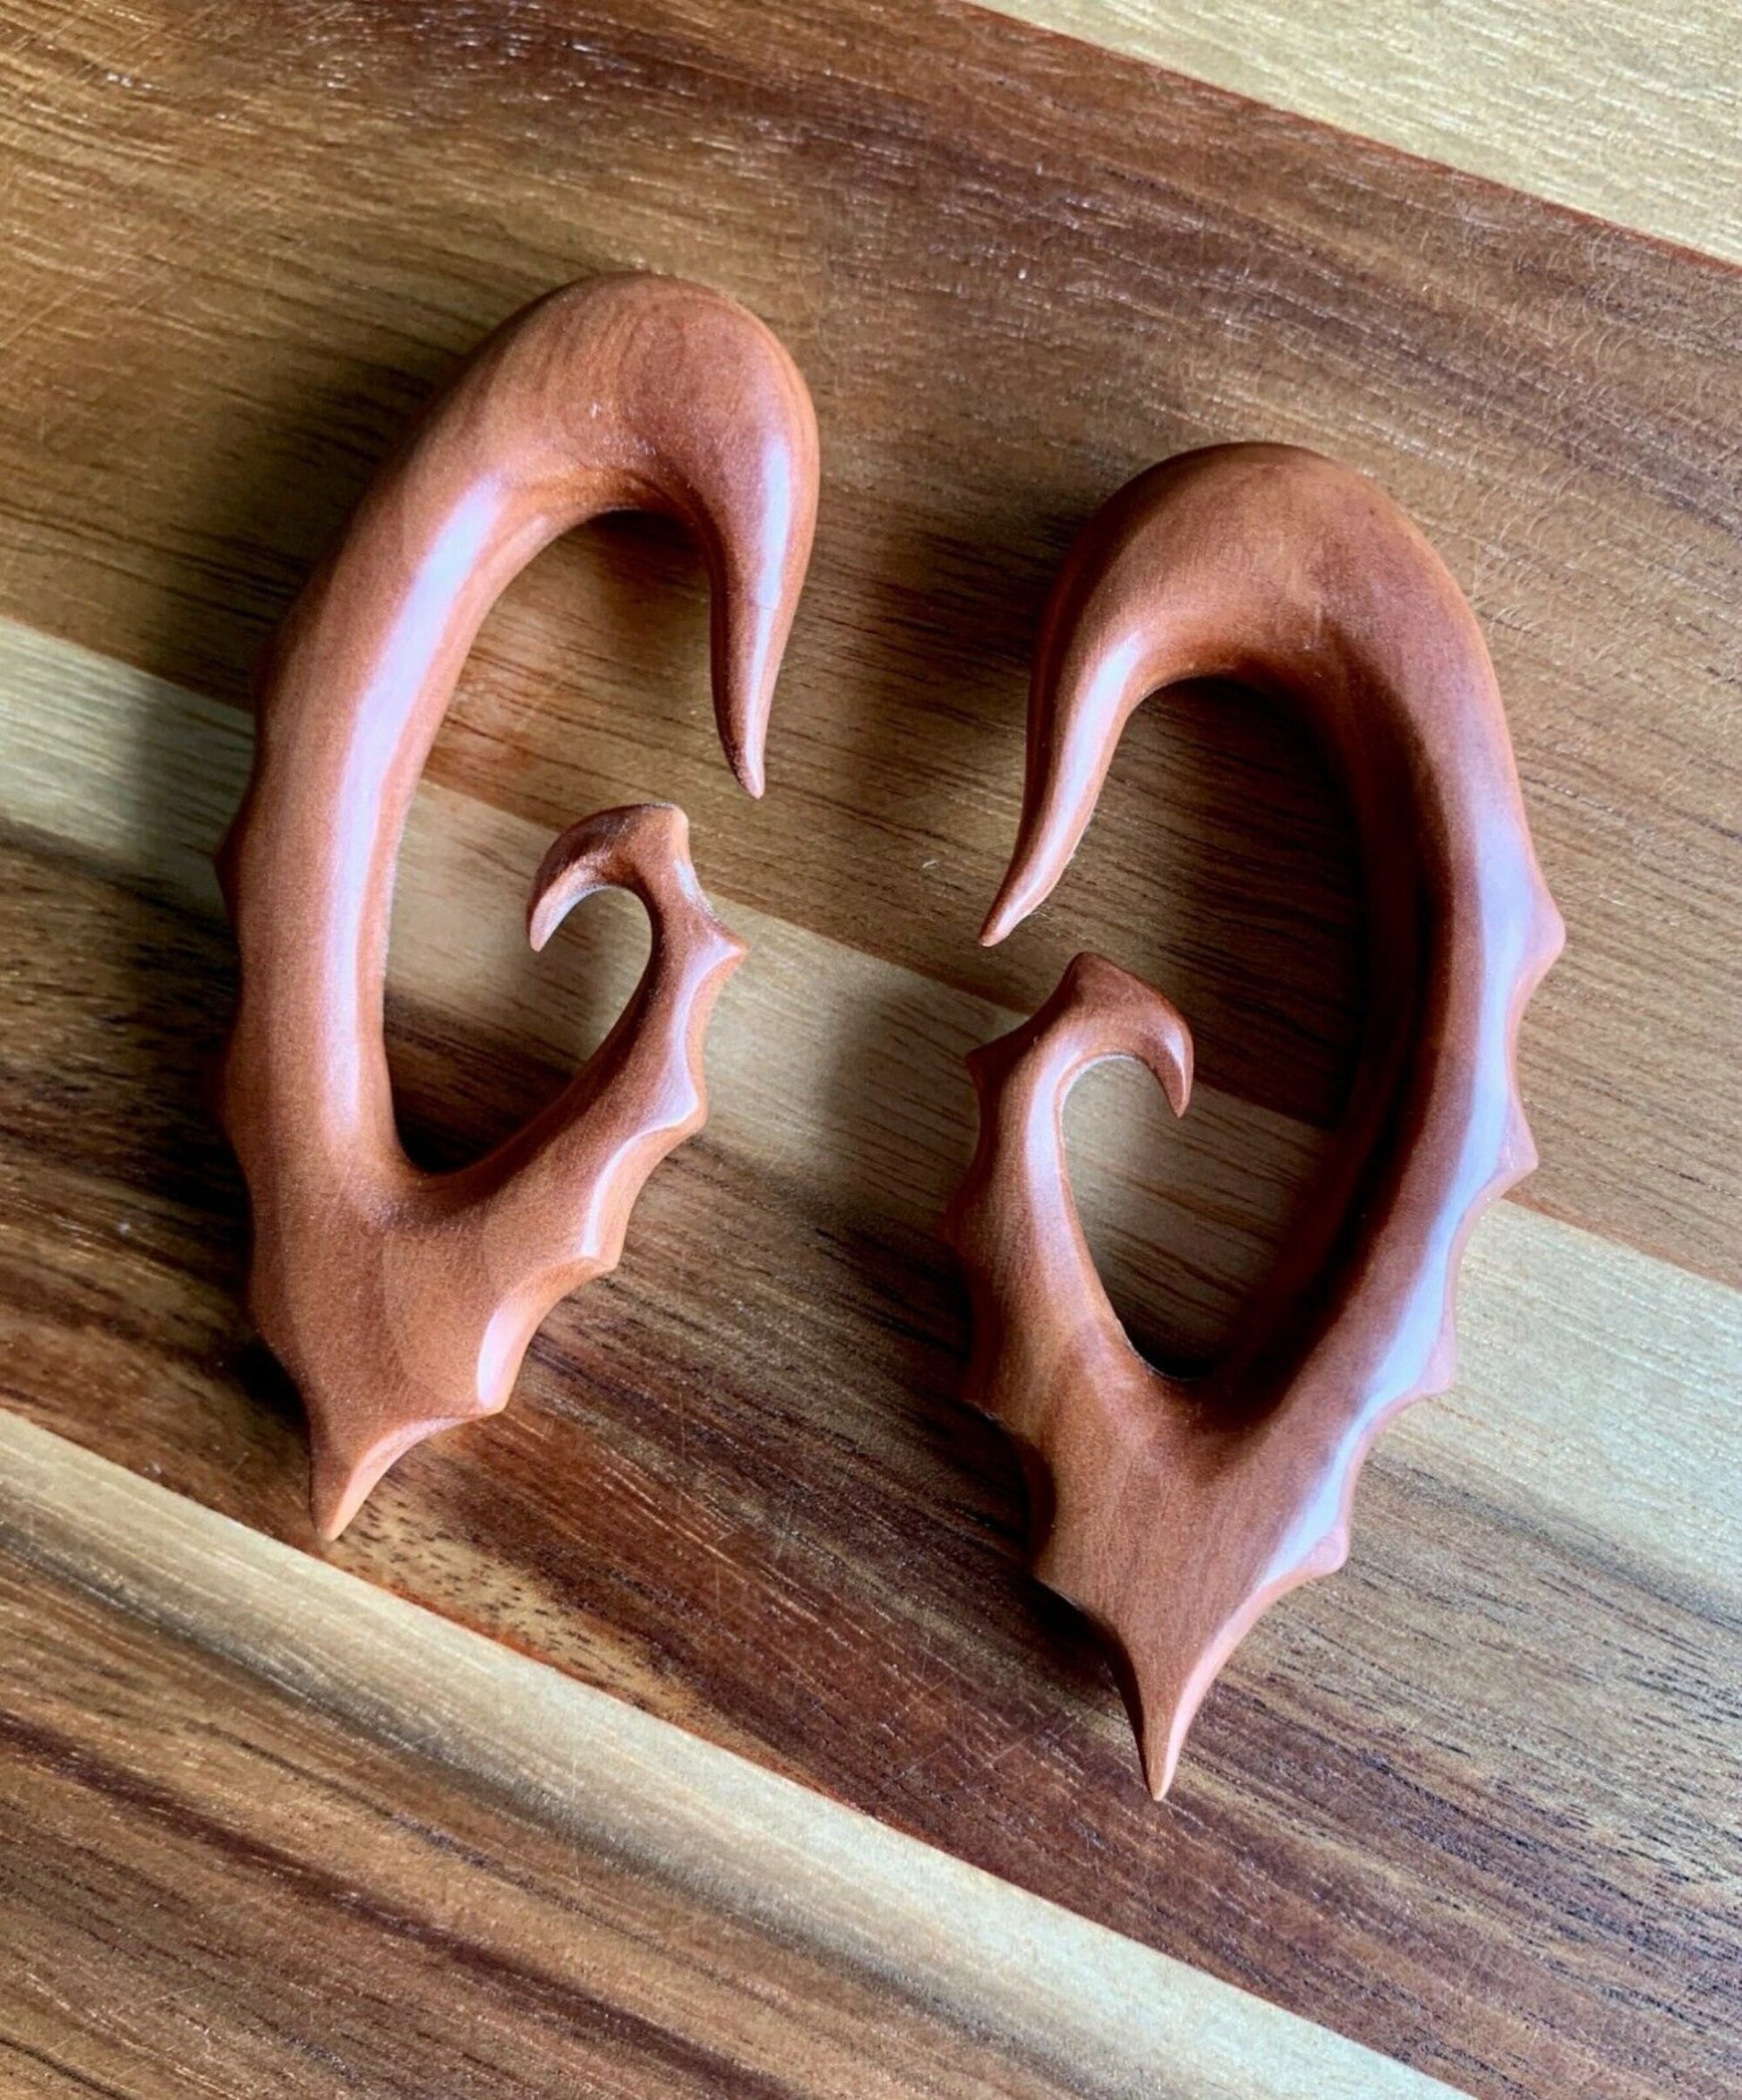 PAIR of Unique Organic Sawo Wood Spiral Tapers Hangers - Gauges 6g (4mm) up to 0000g (12mm) available!